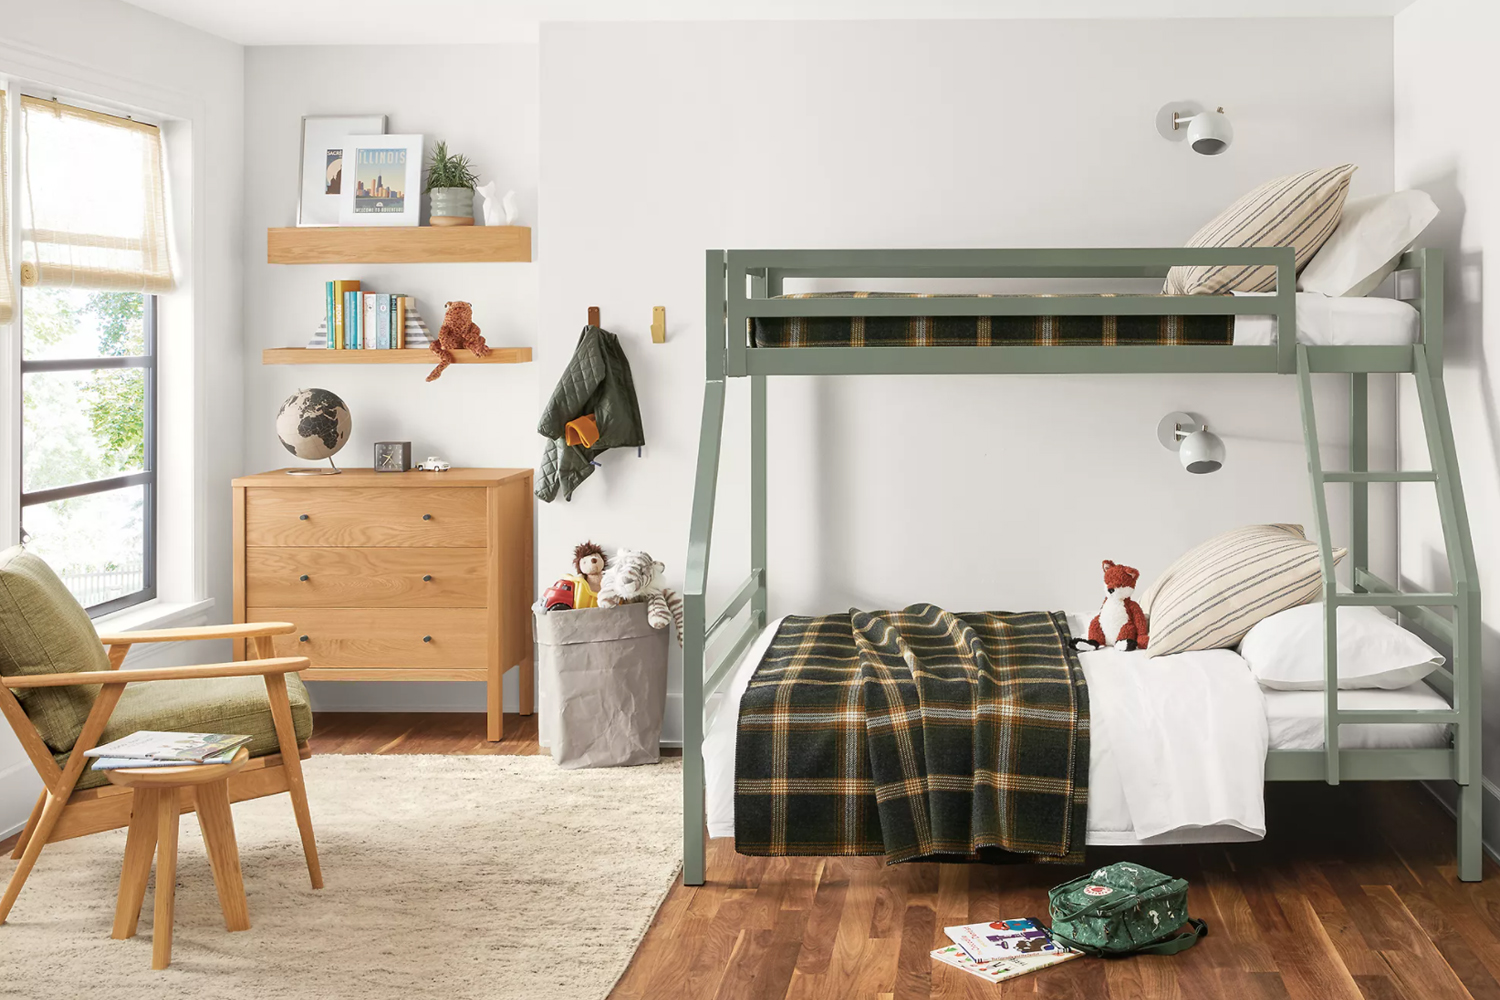 Bunk Beds For Kids Rooms, Kids Room With Bunk Beds